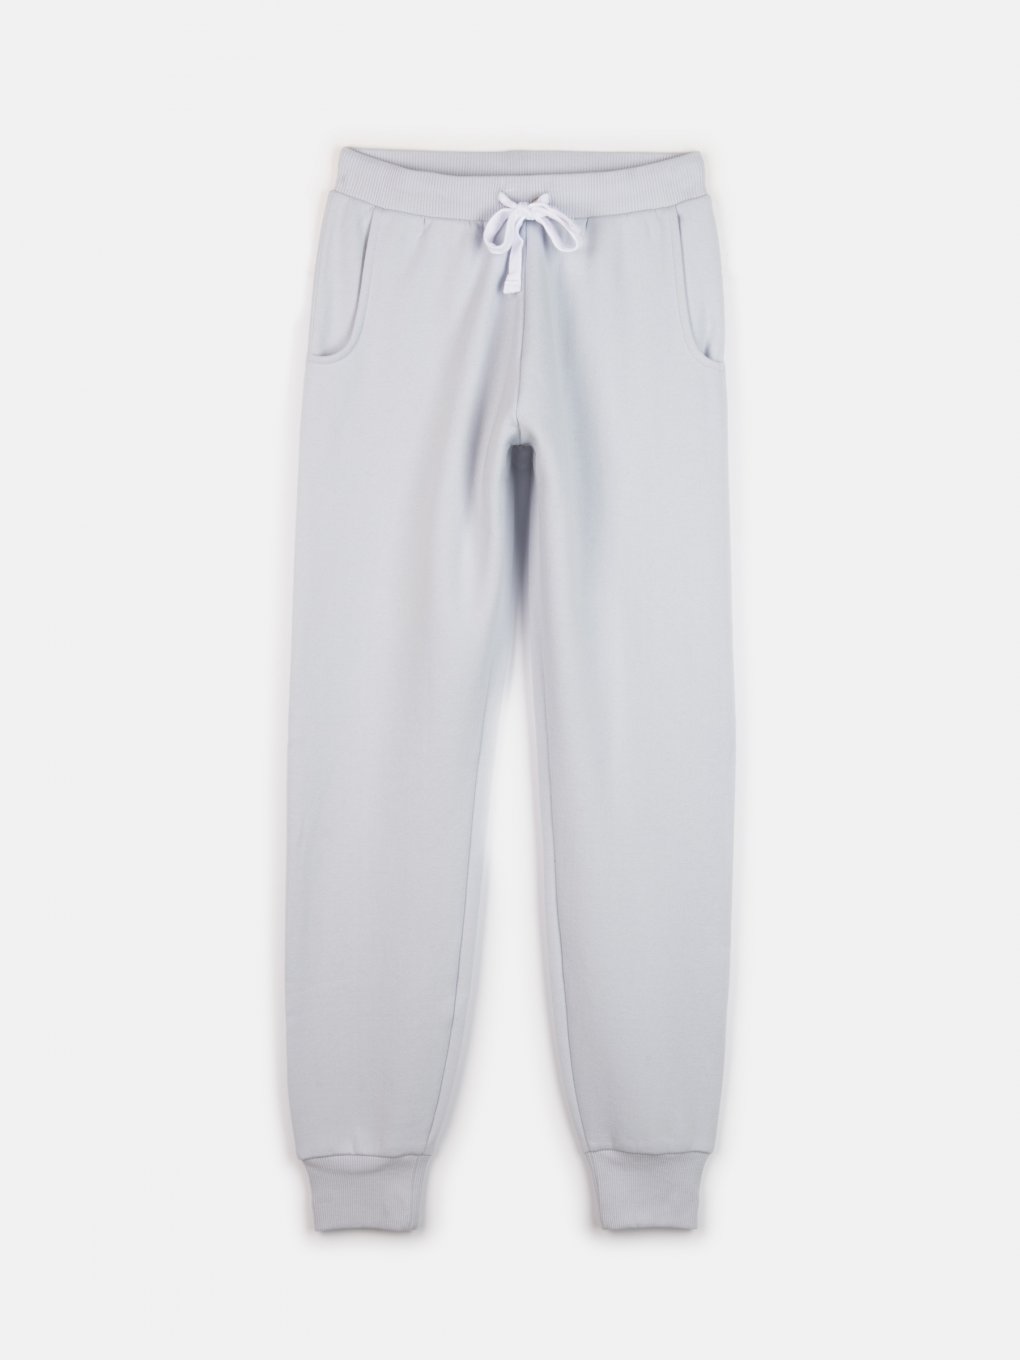 Sweatpants with pockets